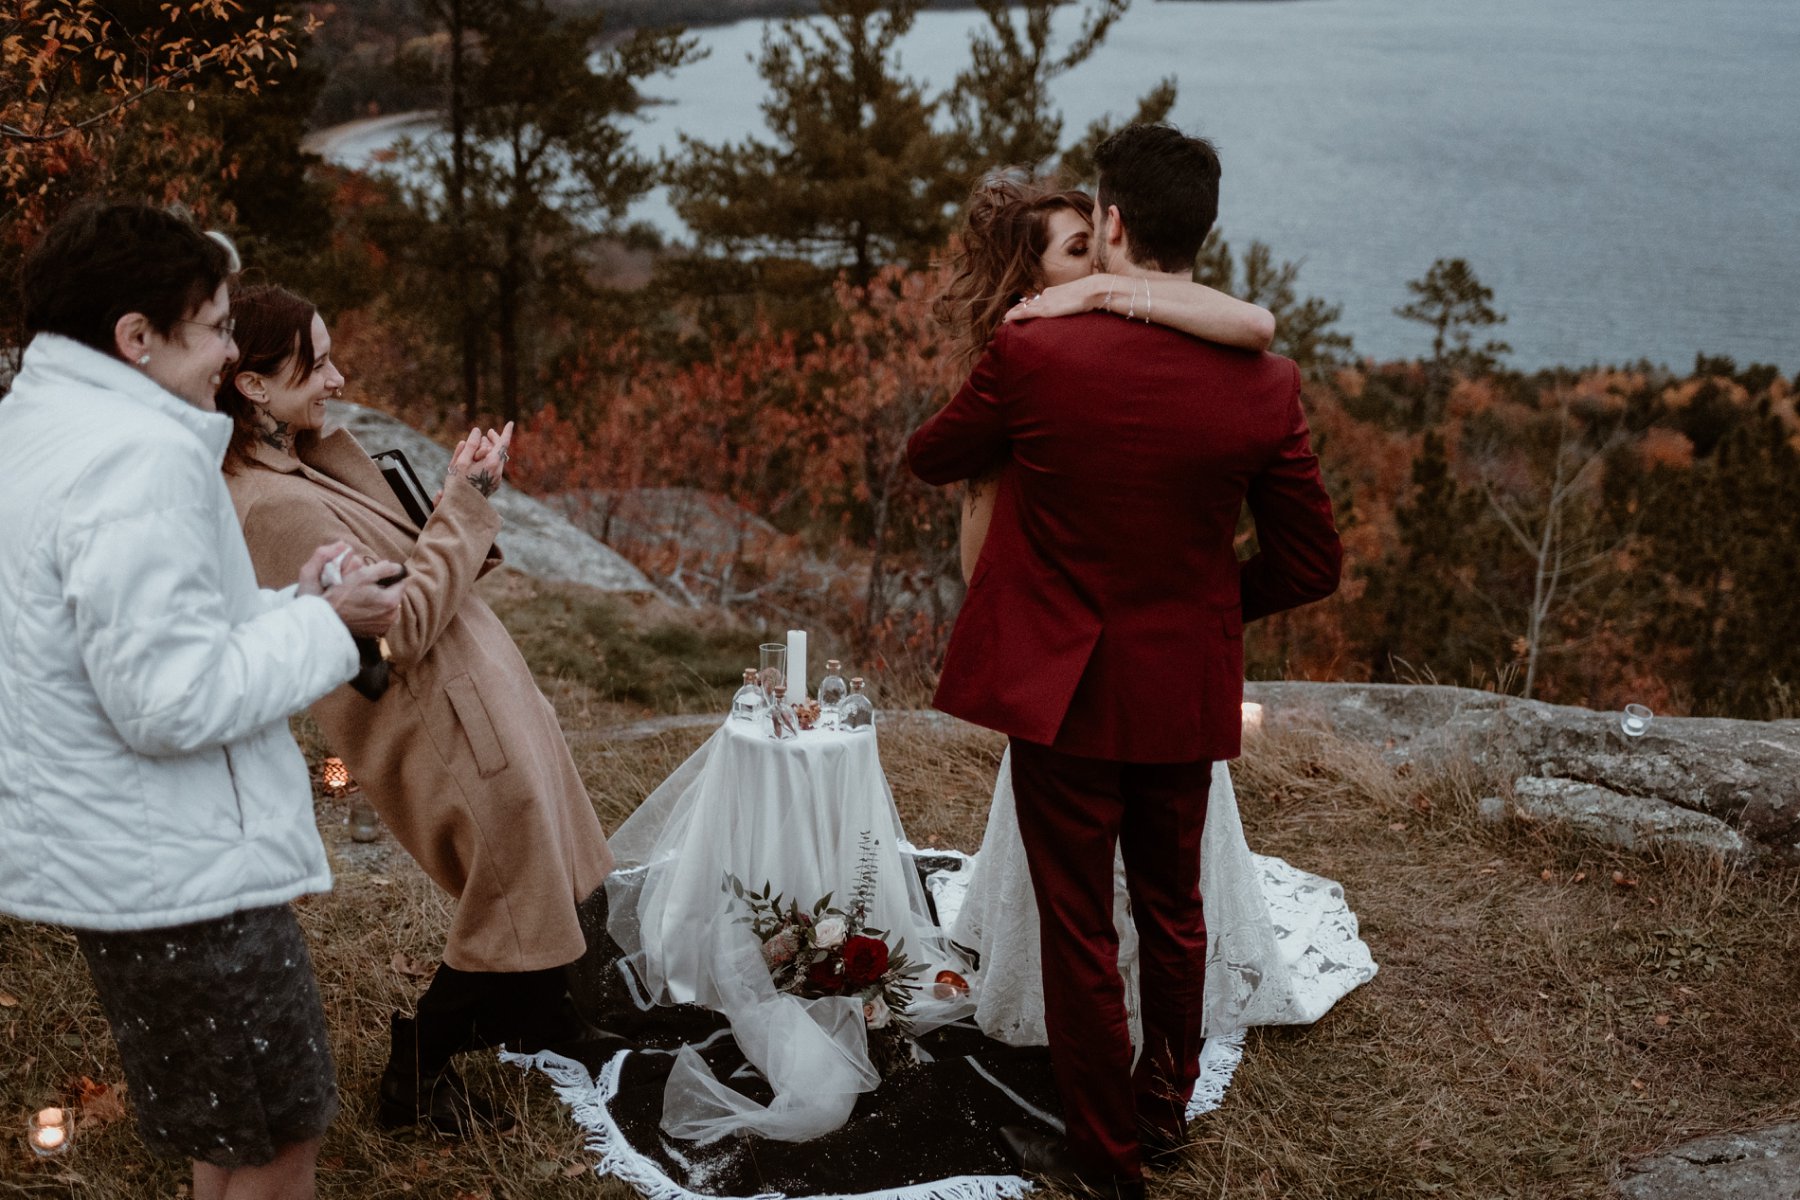 Sugarloaf Mountain elopement in Michigan's UP